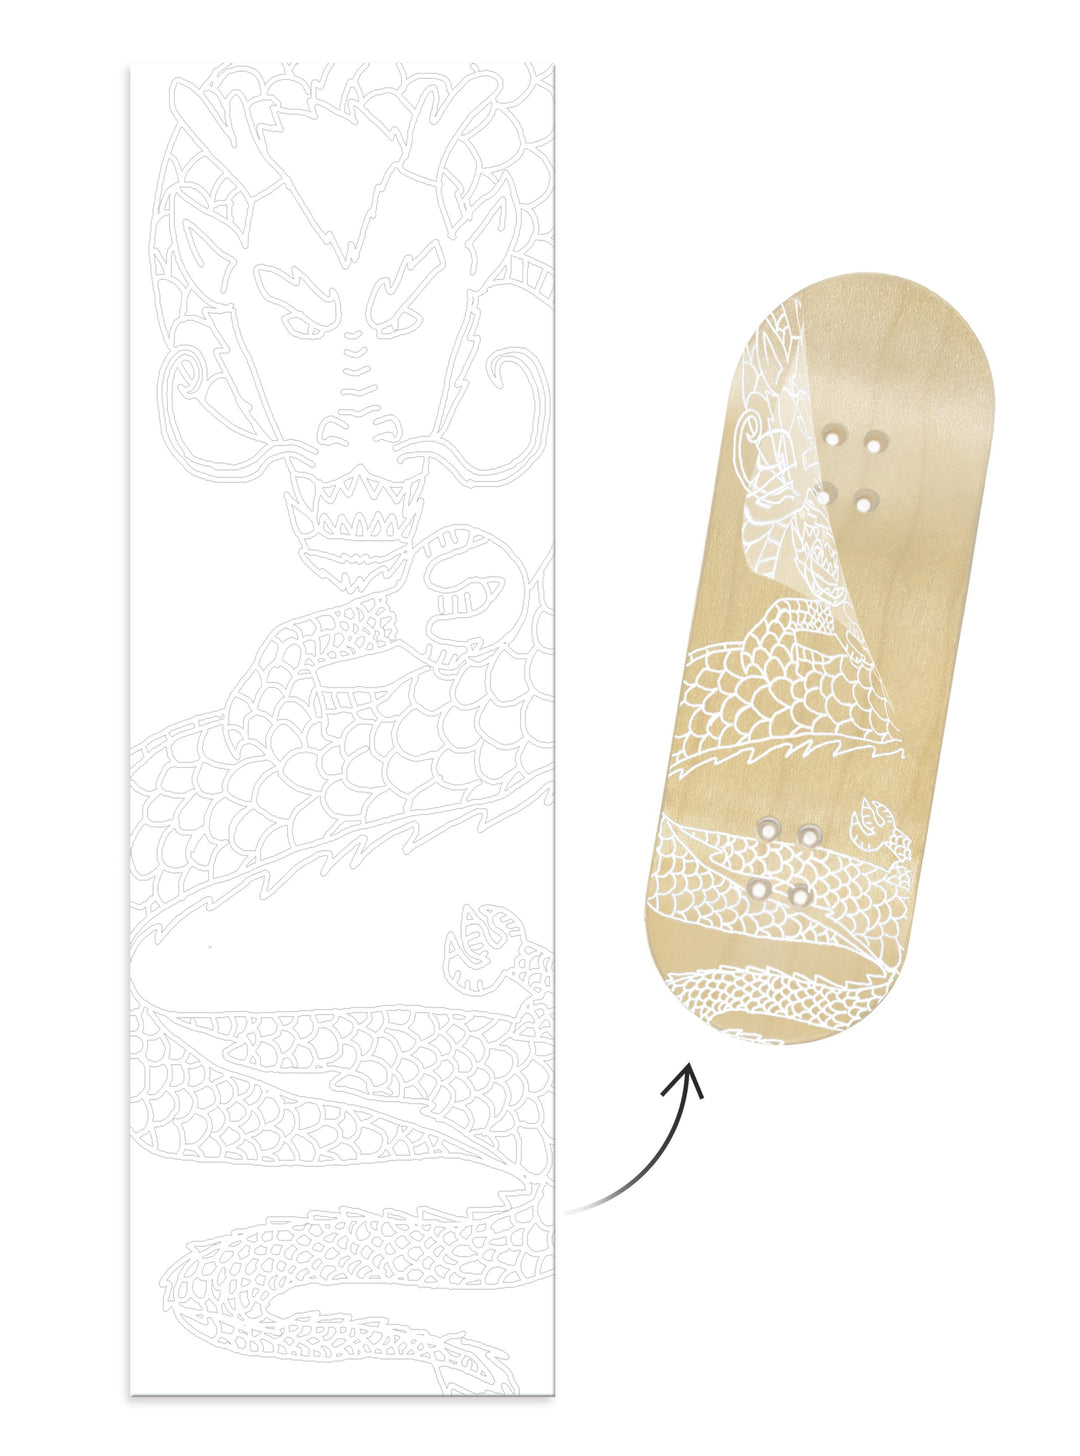 Teak Tuning "White Dragon Born" WellVentions Collaboration Deck Graphic Wrap - Designed by Christian - 35mm x 110mm (Transparent Background)